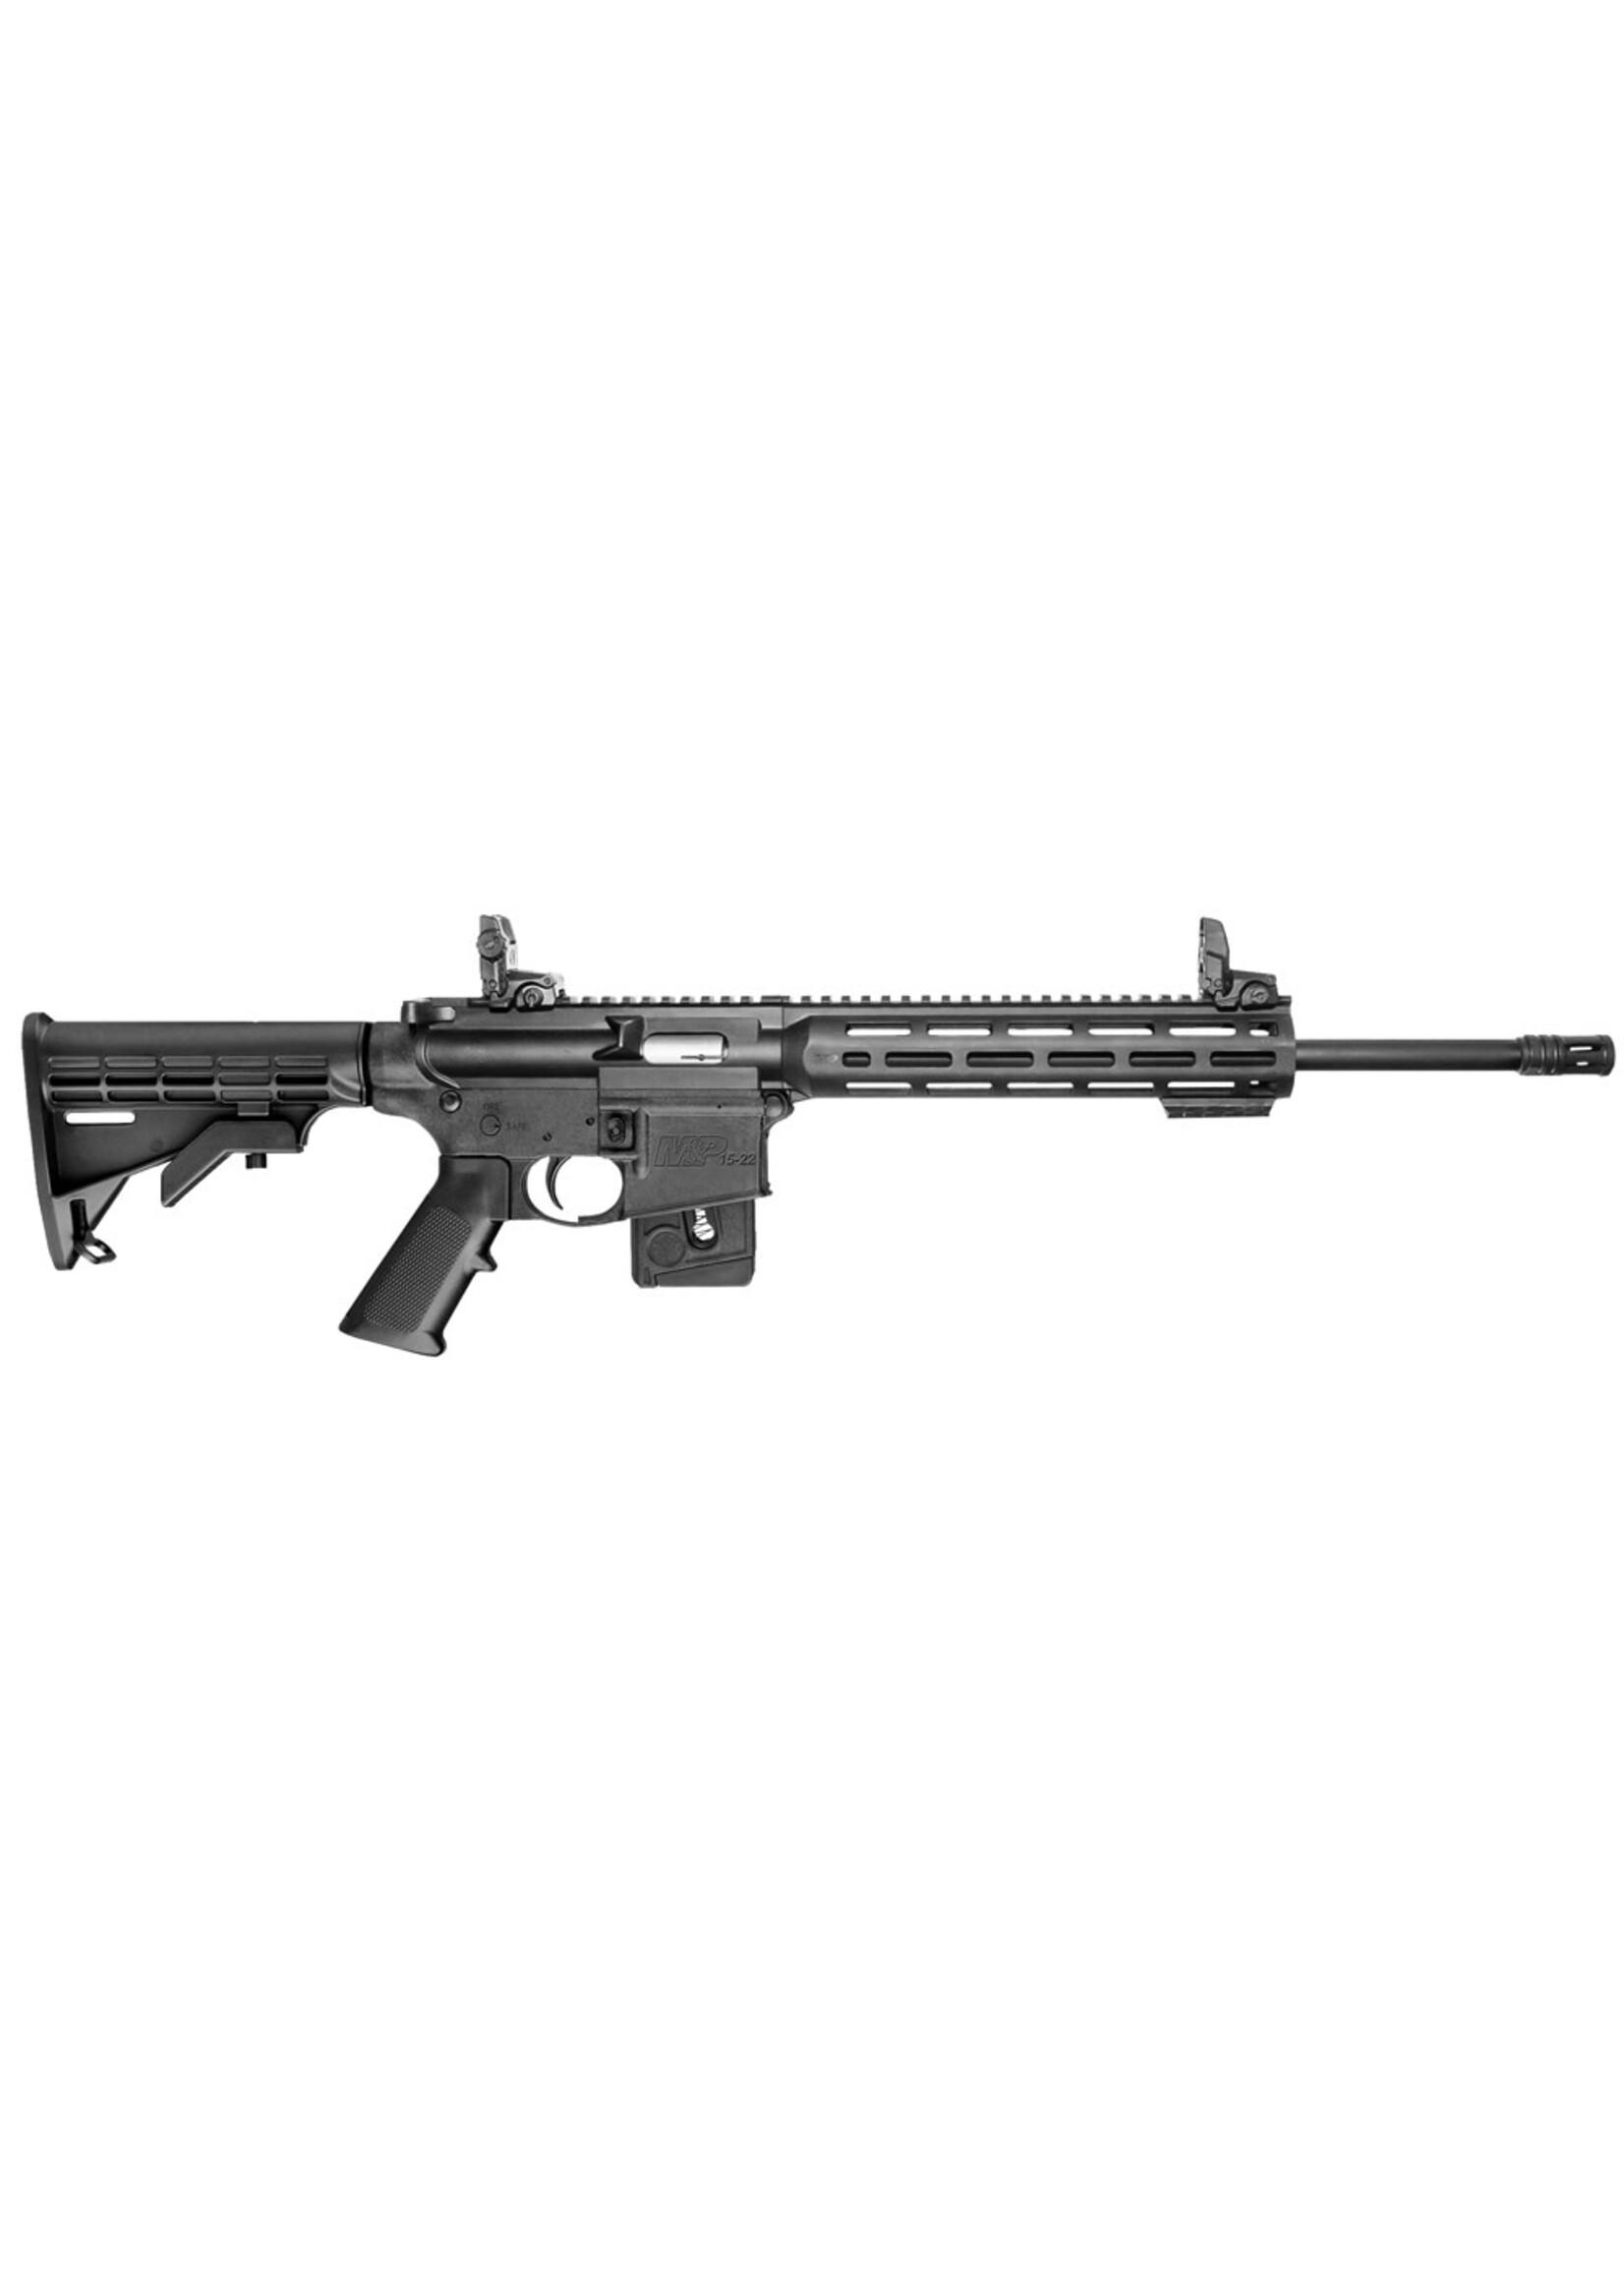 Smith and Wesson (S&W) Smith & Wesson 10208 M&P15 Sport 22 LR 25+1 16.50" Carbon Steel Barrel, 6 Position CAR Stock, 2" M-Lok Rail Panel Included, 10" M&P Slim Handguard With M-Lok, Magpul MBUS Folding Sights, 2 Position Safety, Optics R